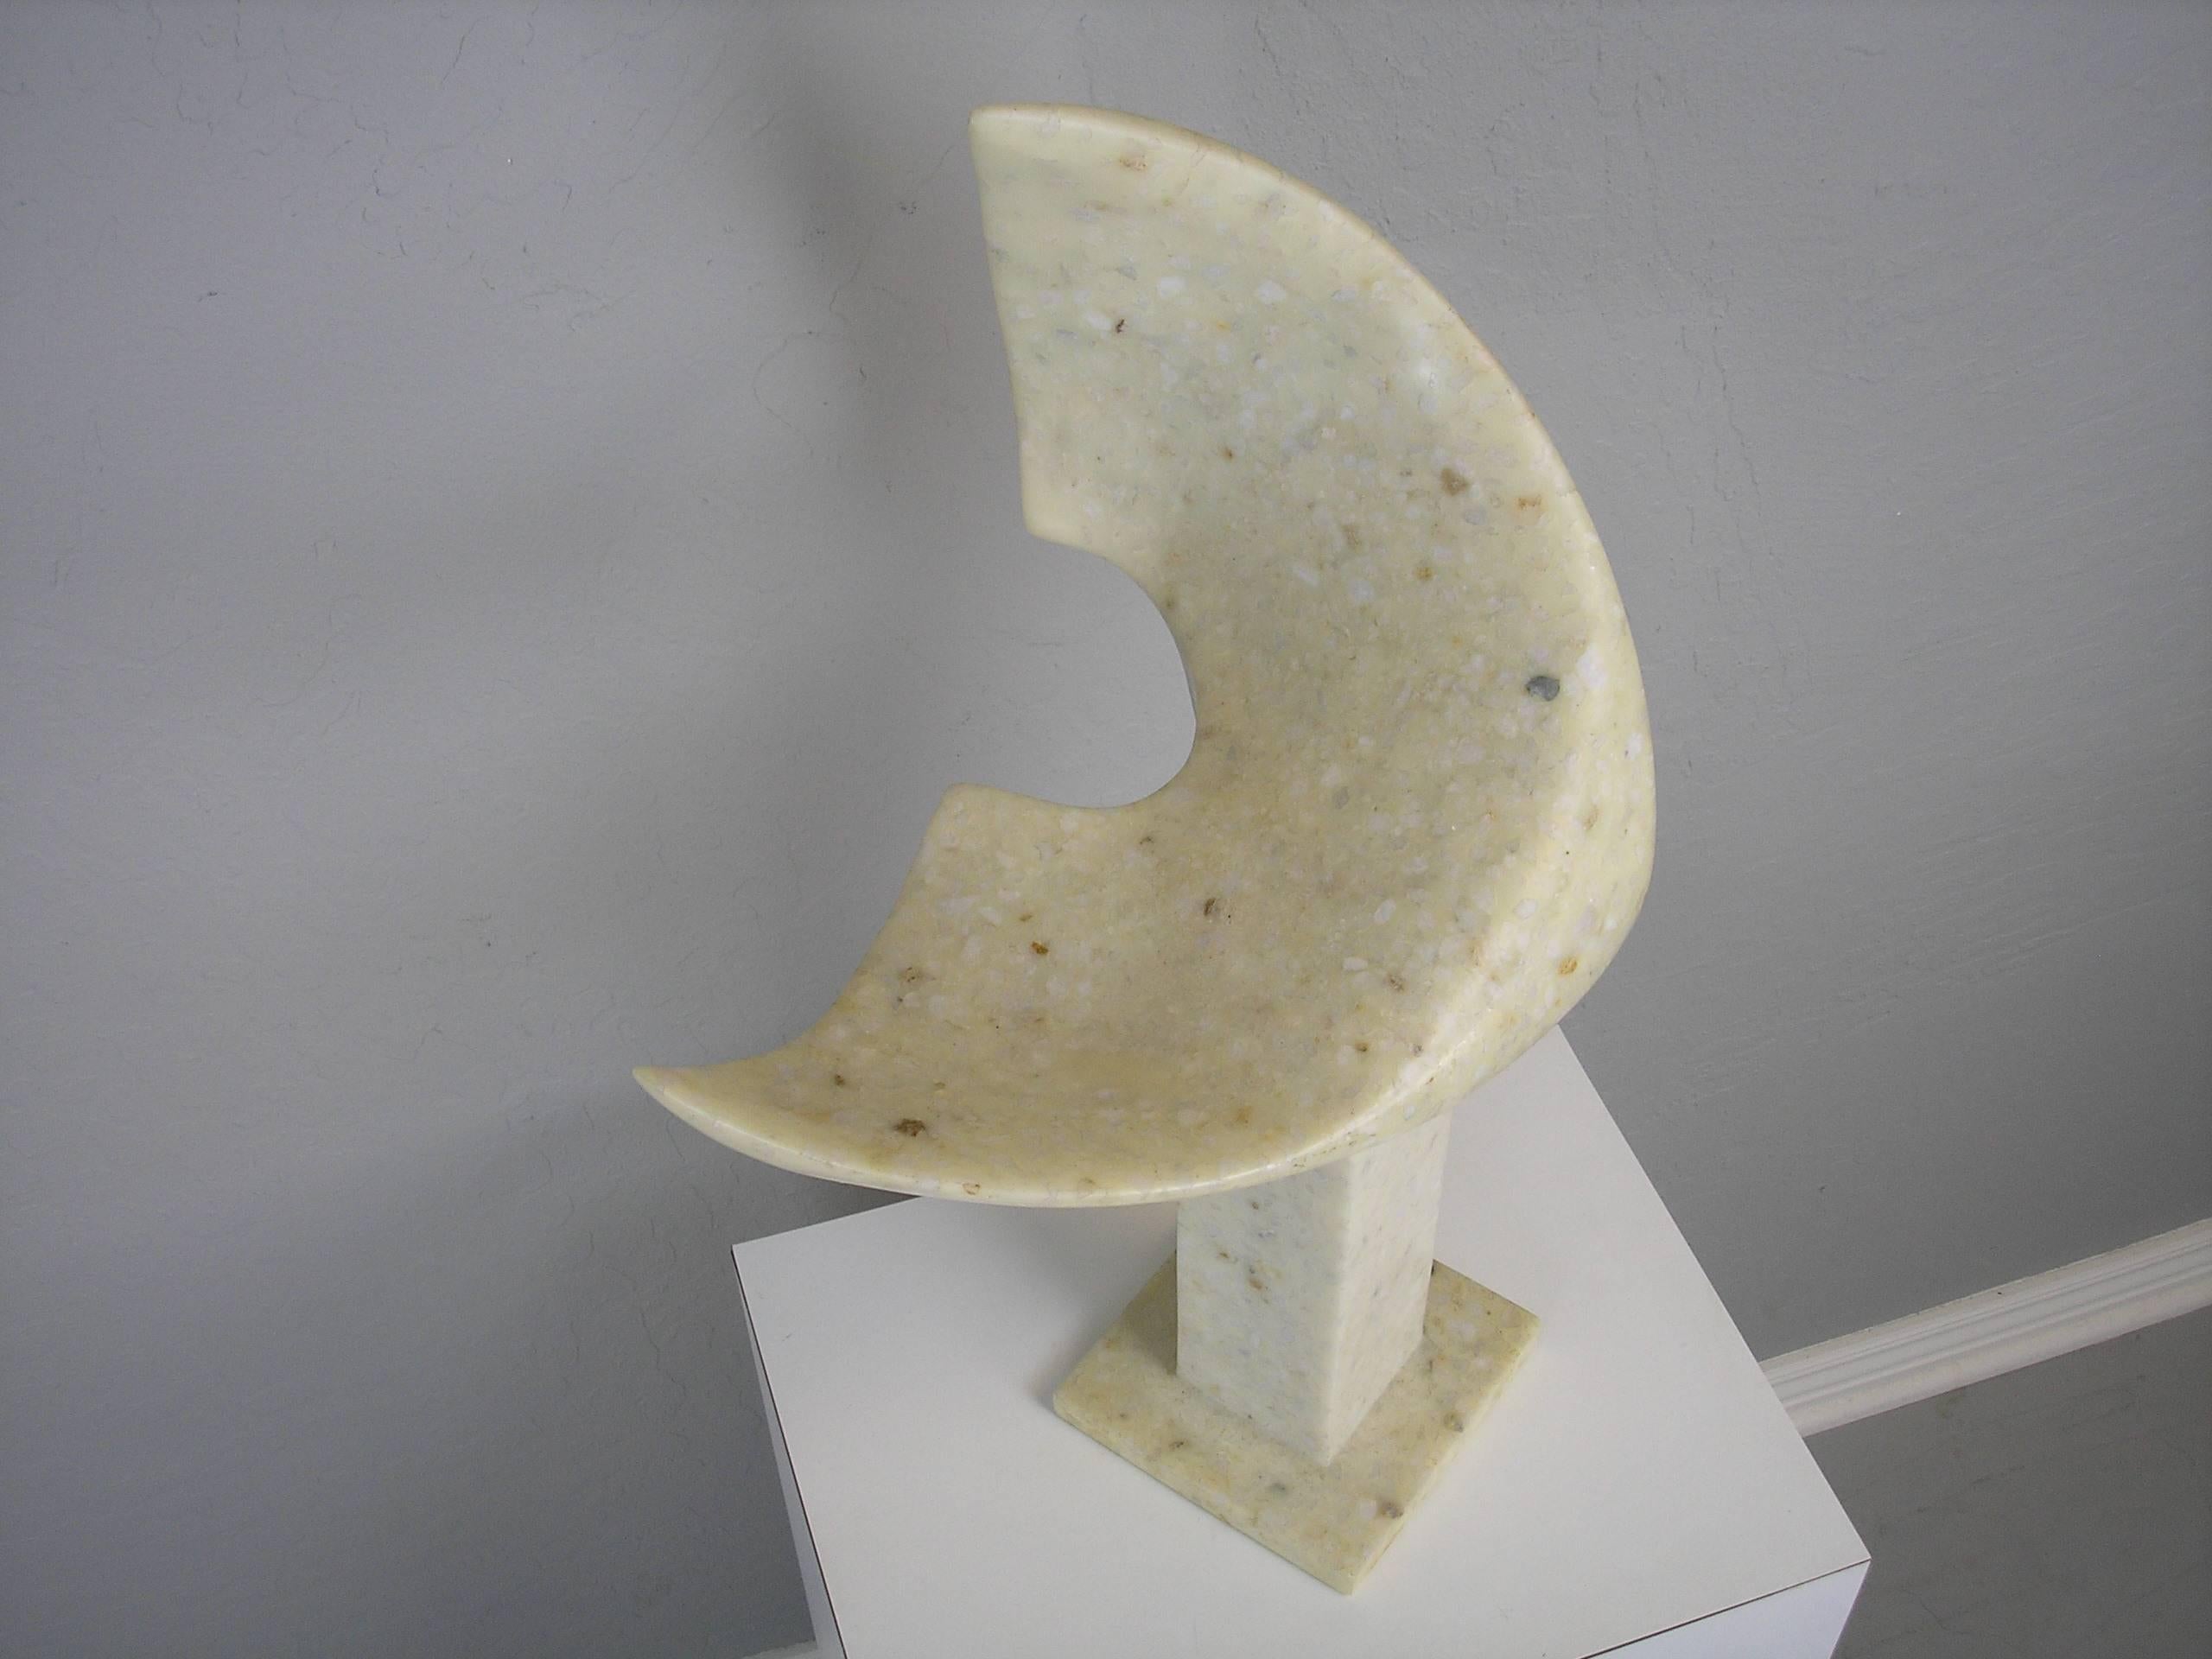 This is a marble sculpture by Kuki, circa 1970. Excellent condition. Signed on the bottom. Appears to be 14/200 edition.